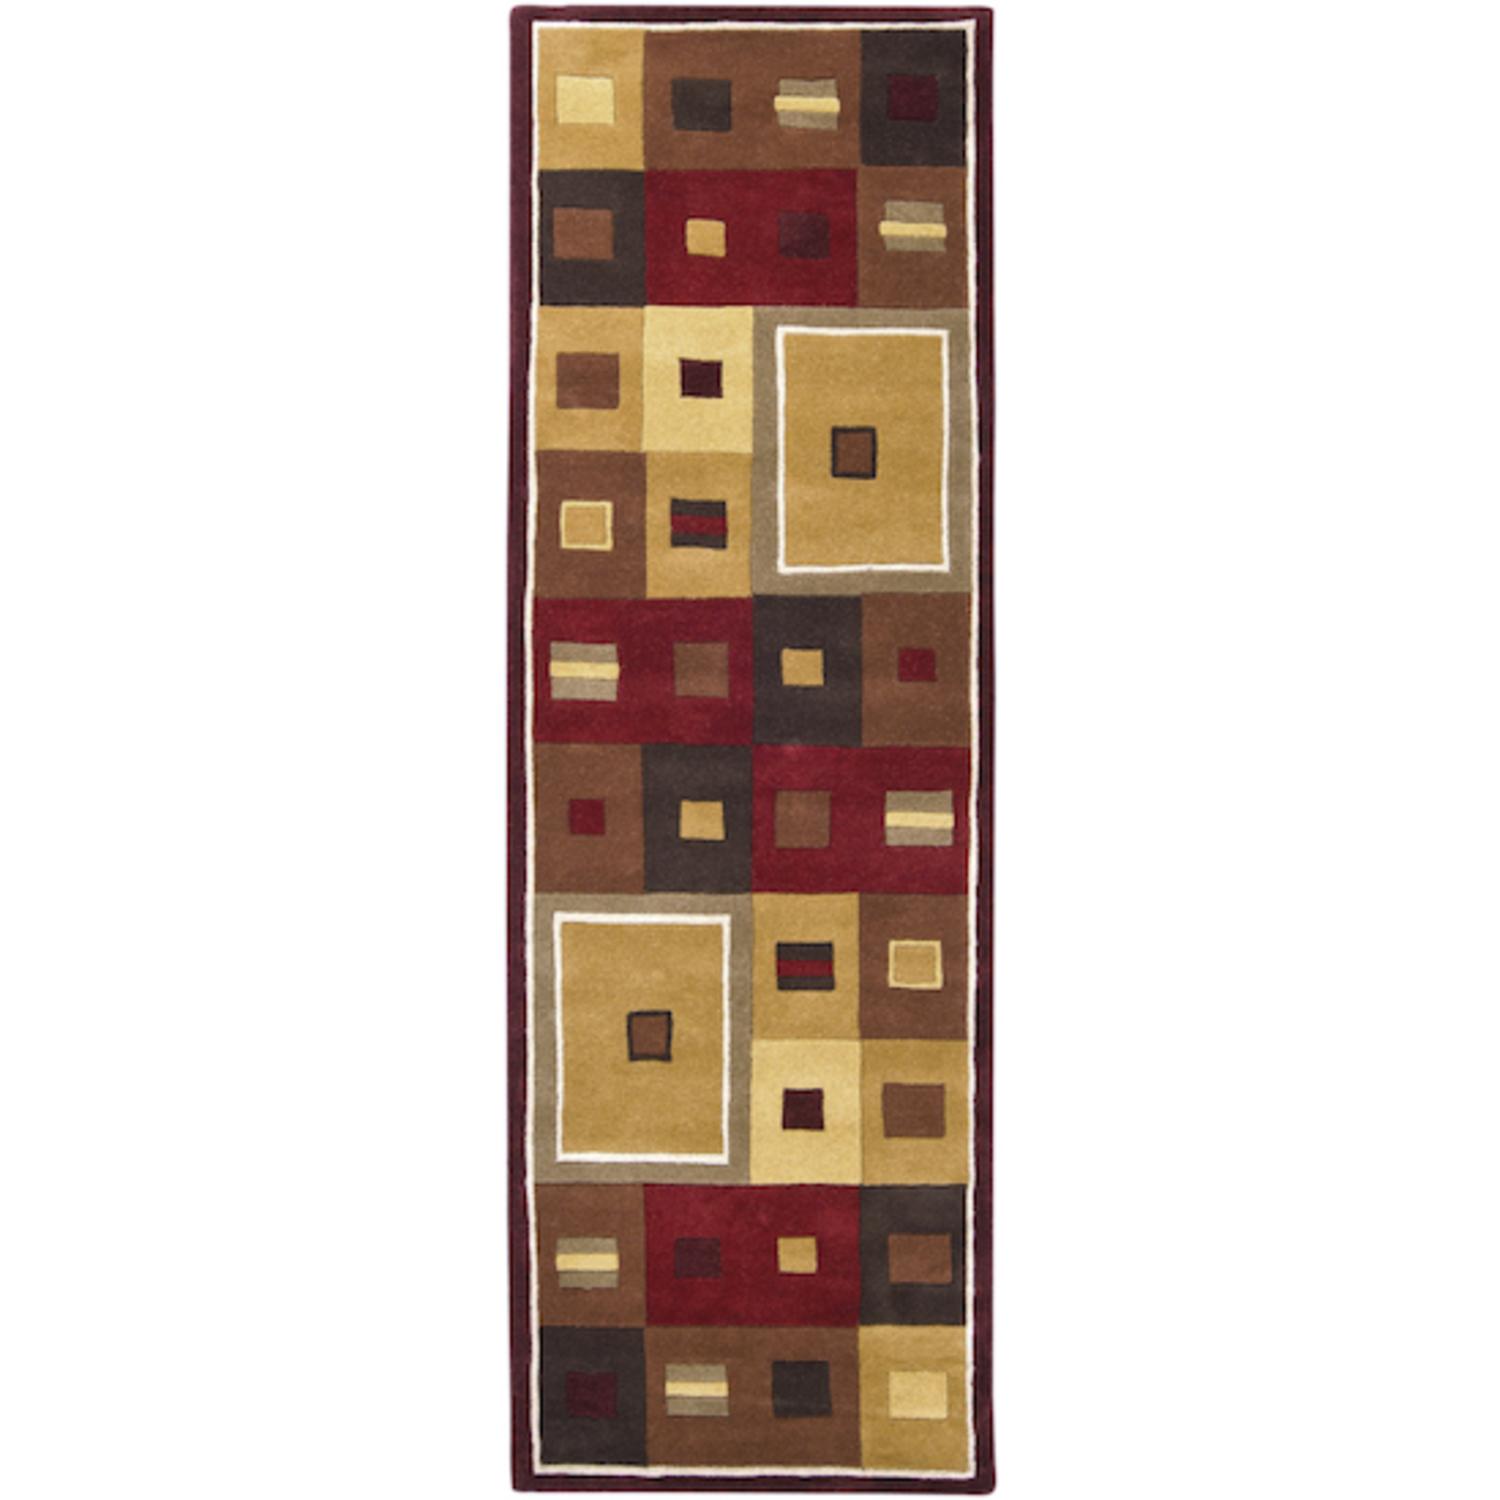 CC Home Furnishings 6' x 6' Kadmos Frames Sienna Red and Golden Brown Wool Area Throw Rug